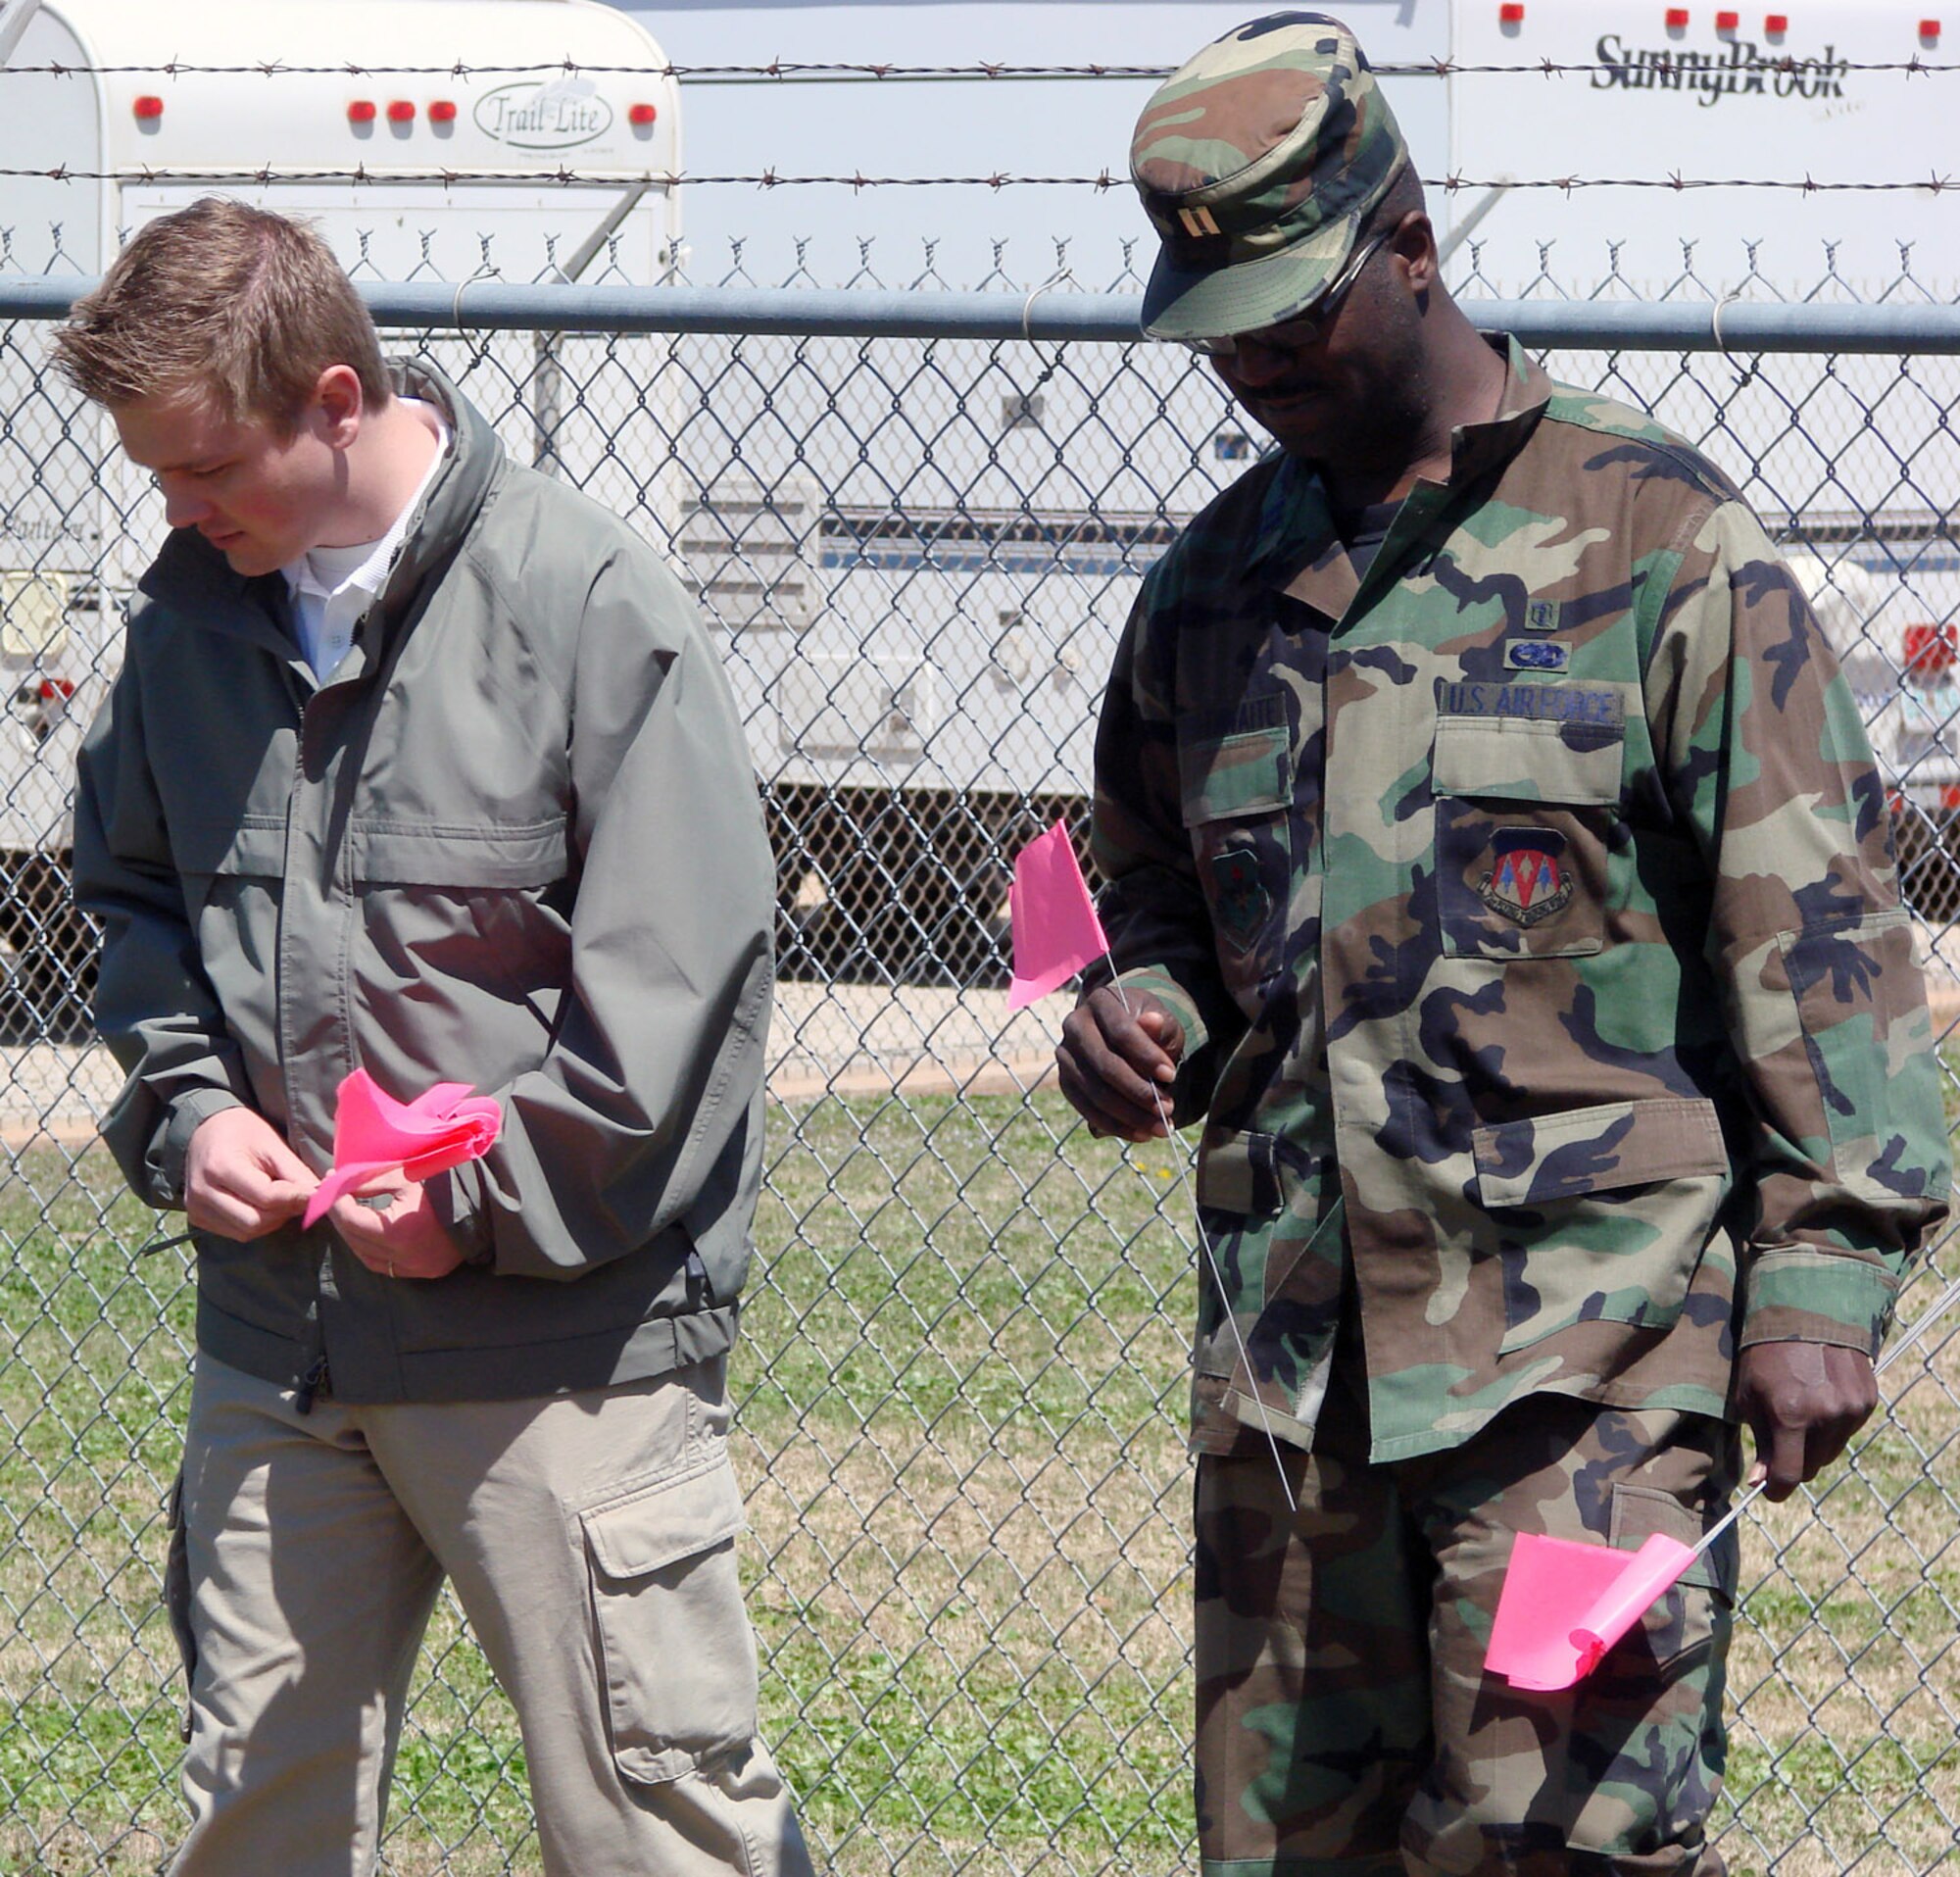 Special Agent Skip Wheeler, Air Force Office of Special Investigations Detachment 438, and Capt. Timothy Brathwaite, 71st Medical Group bioenvironmental engineering, walk a grid and mark evidence during an exercise April 15 at Vance Air Force Base, Okla., on how to preserve and process a chemical or weapon-of-mass-destruction scene that may be a result of criminal activity. (U.S. Air Force photo/Capt. Tony Wickman)